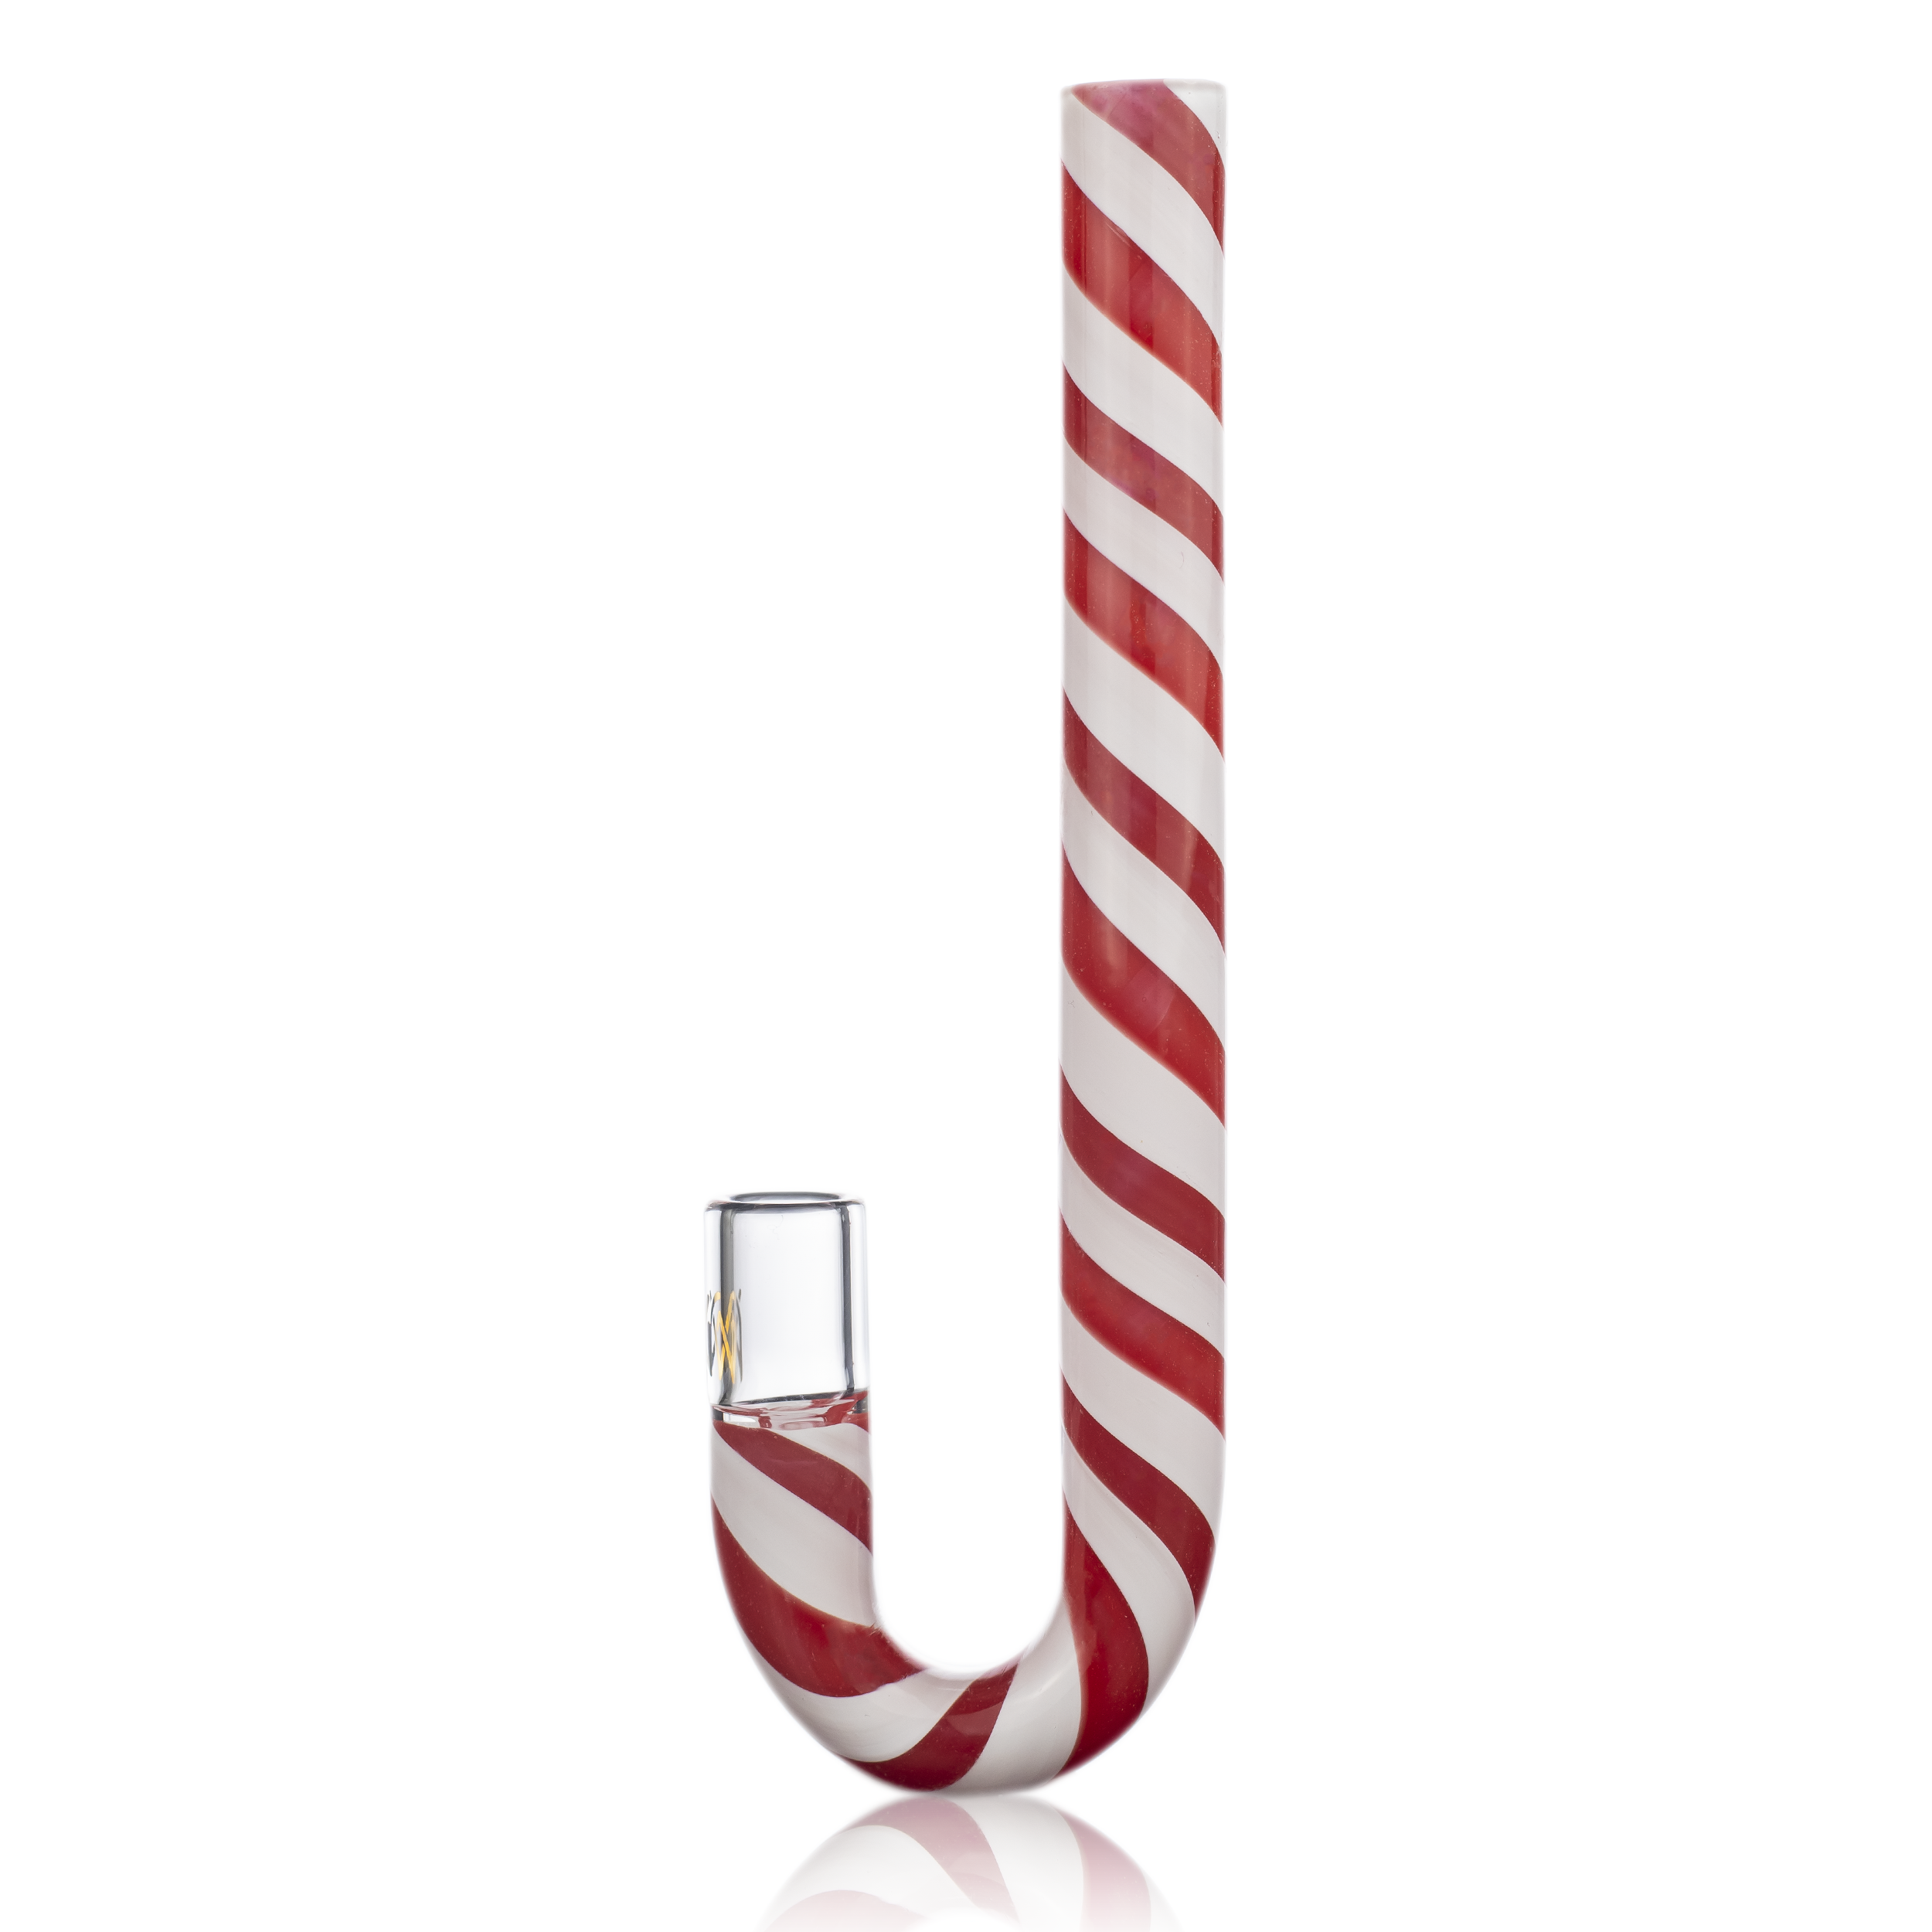 MJ Arsenal Candy Cane One Hitter- LE